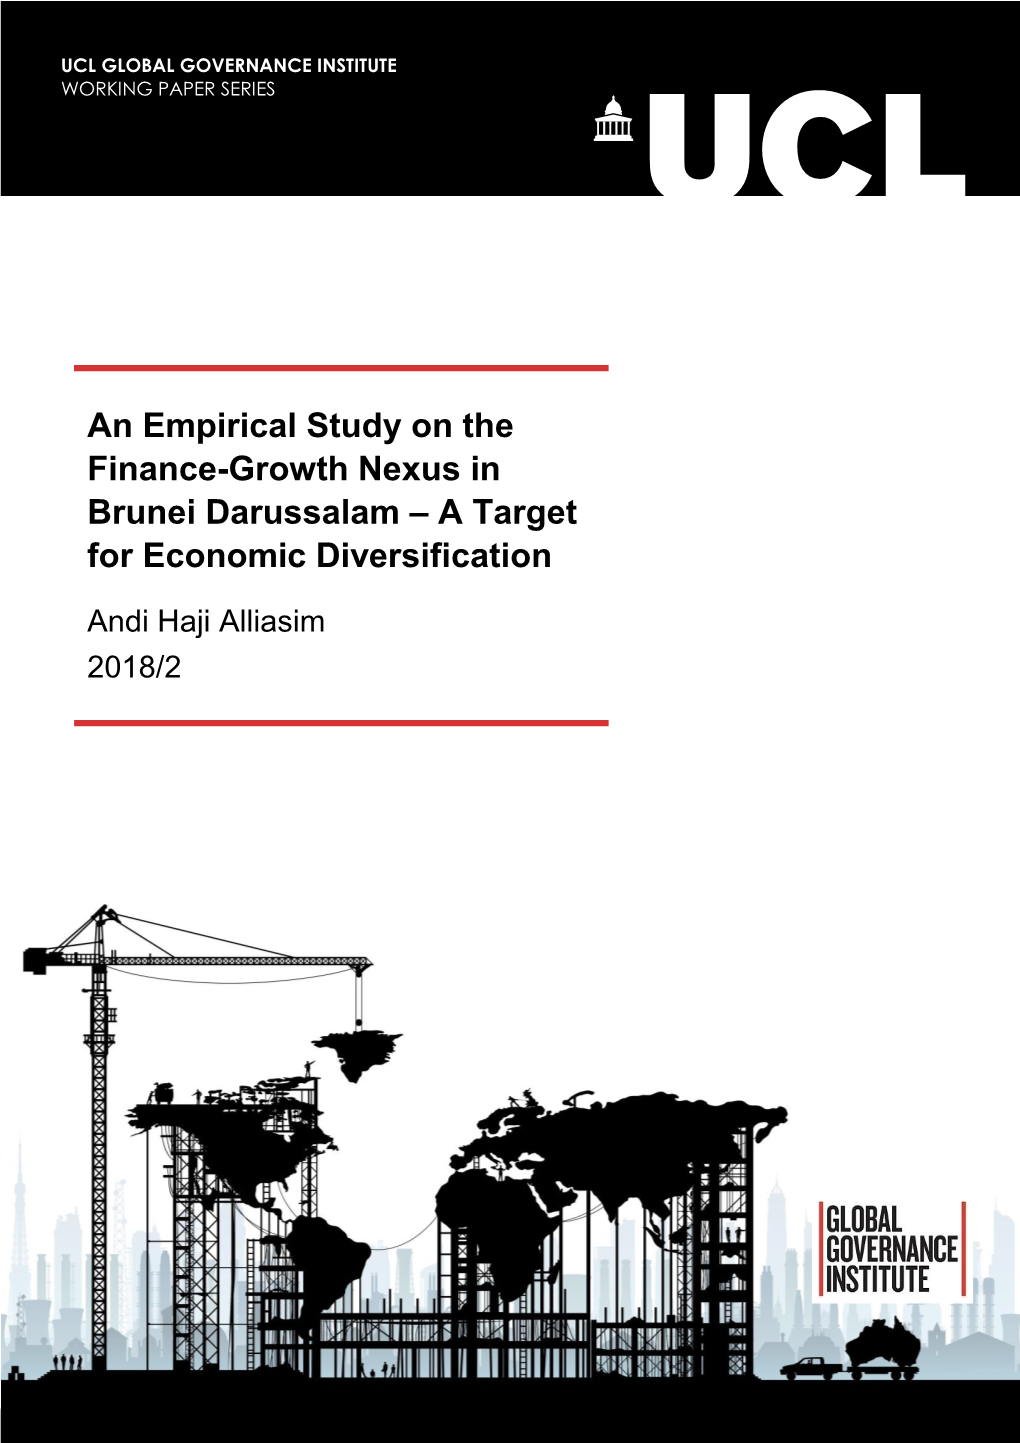 An Empirical Study on the Finance-Growth Nexus in Brunei Darussalam – a Target for Economic Diversification